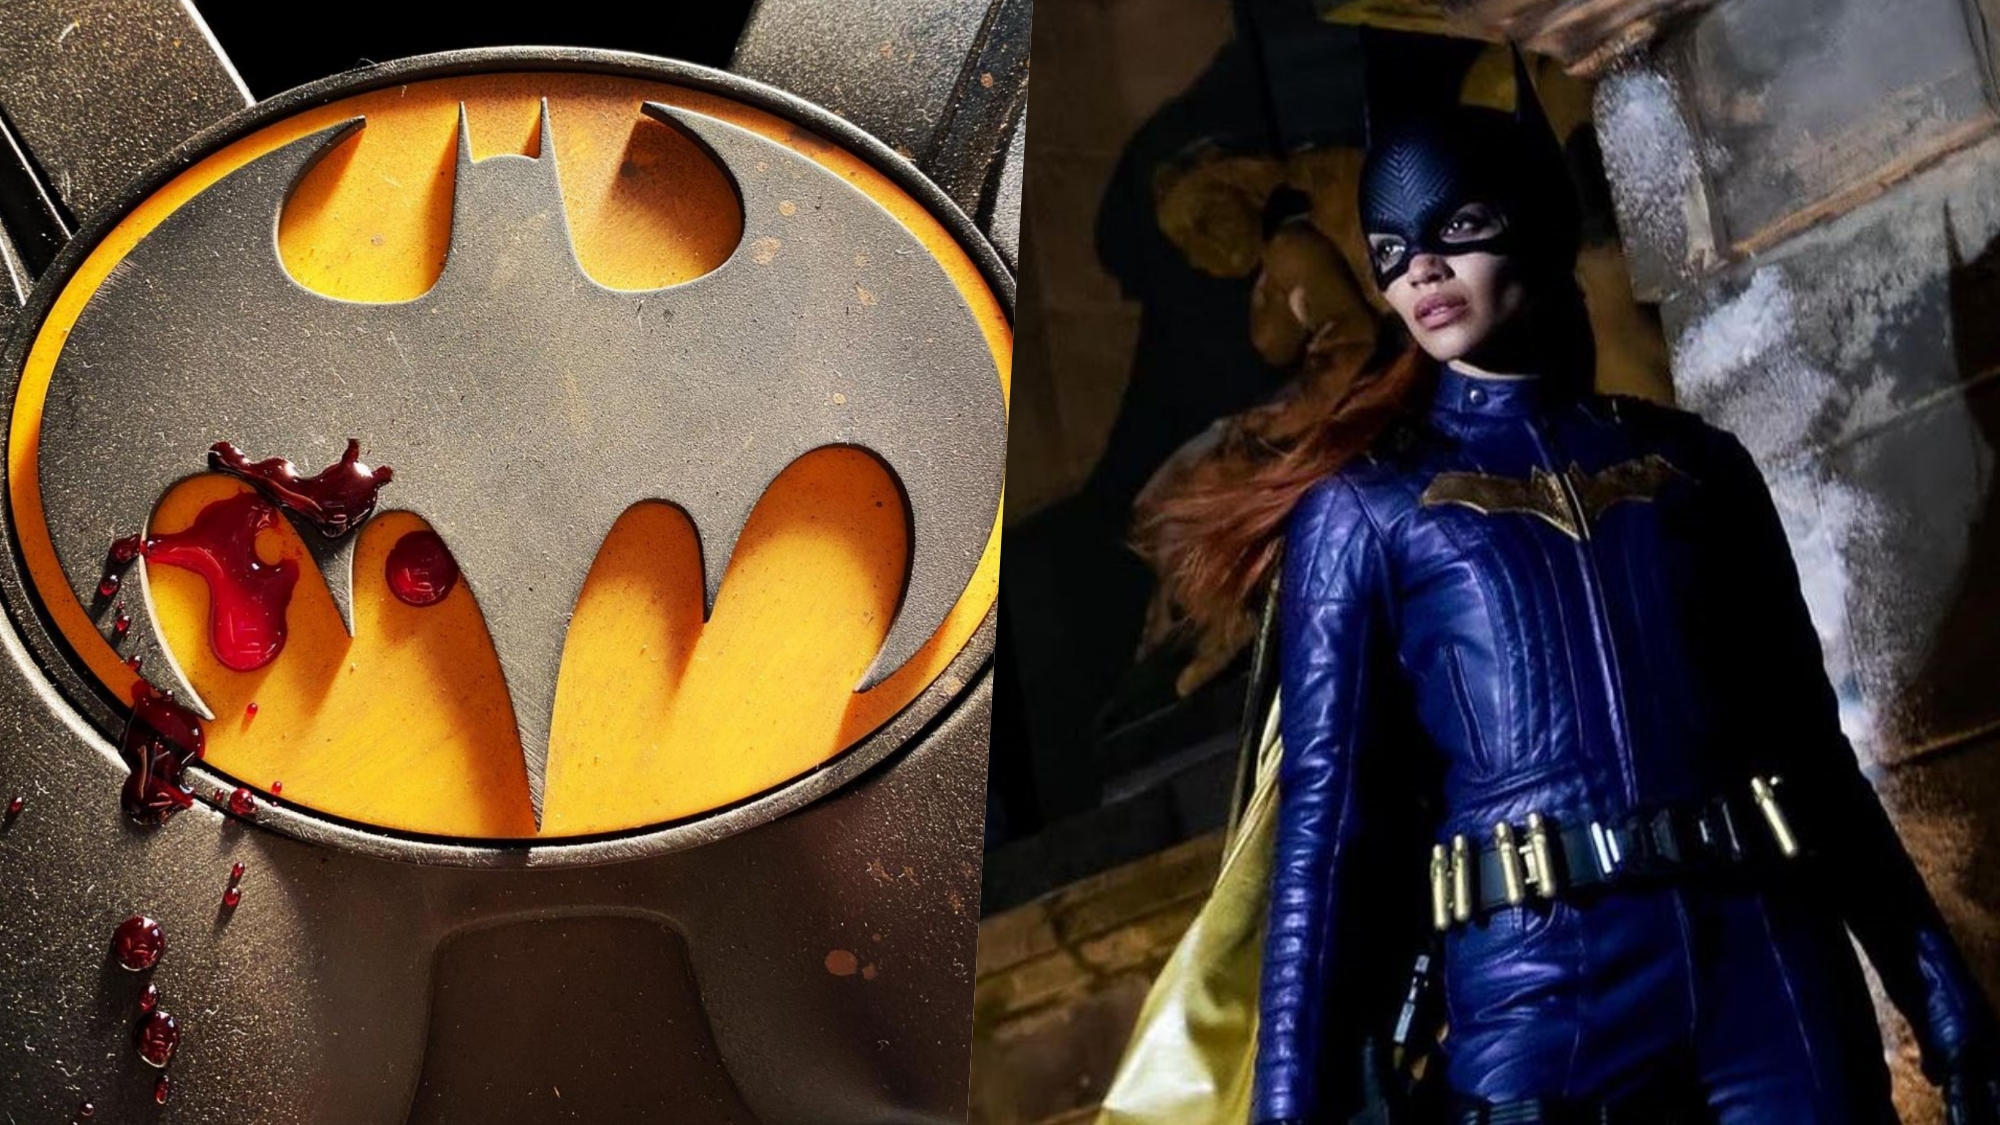 Warner Bros. just spent $90 million on a Batgirl movie and then cancelled  it | T3